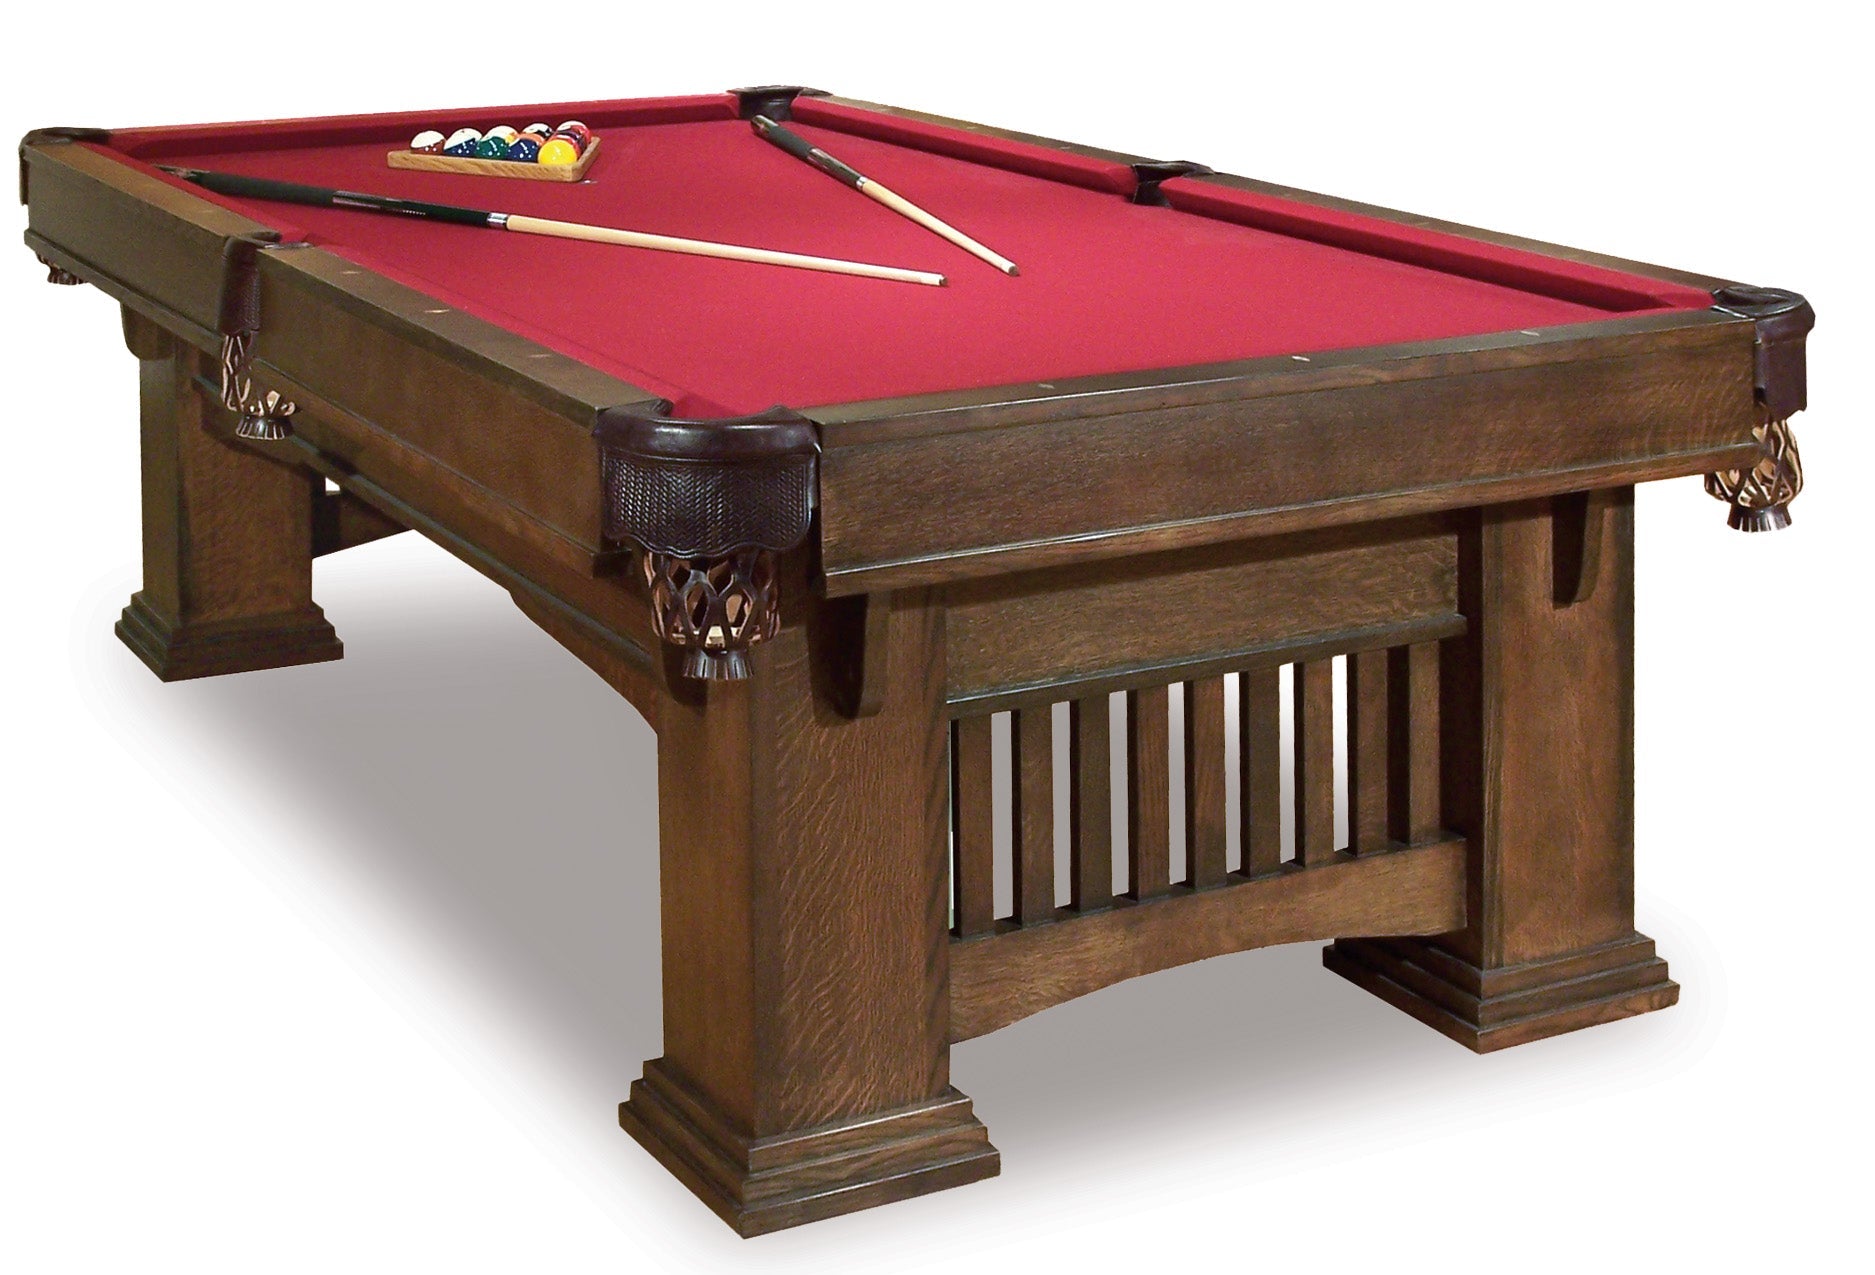 7' Hand-crafted Classic Mission Pool Table (Quarter sawn Oak)